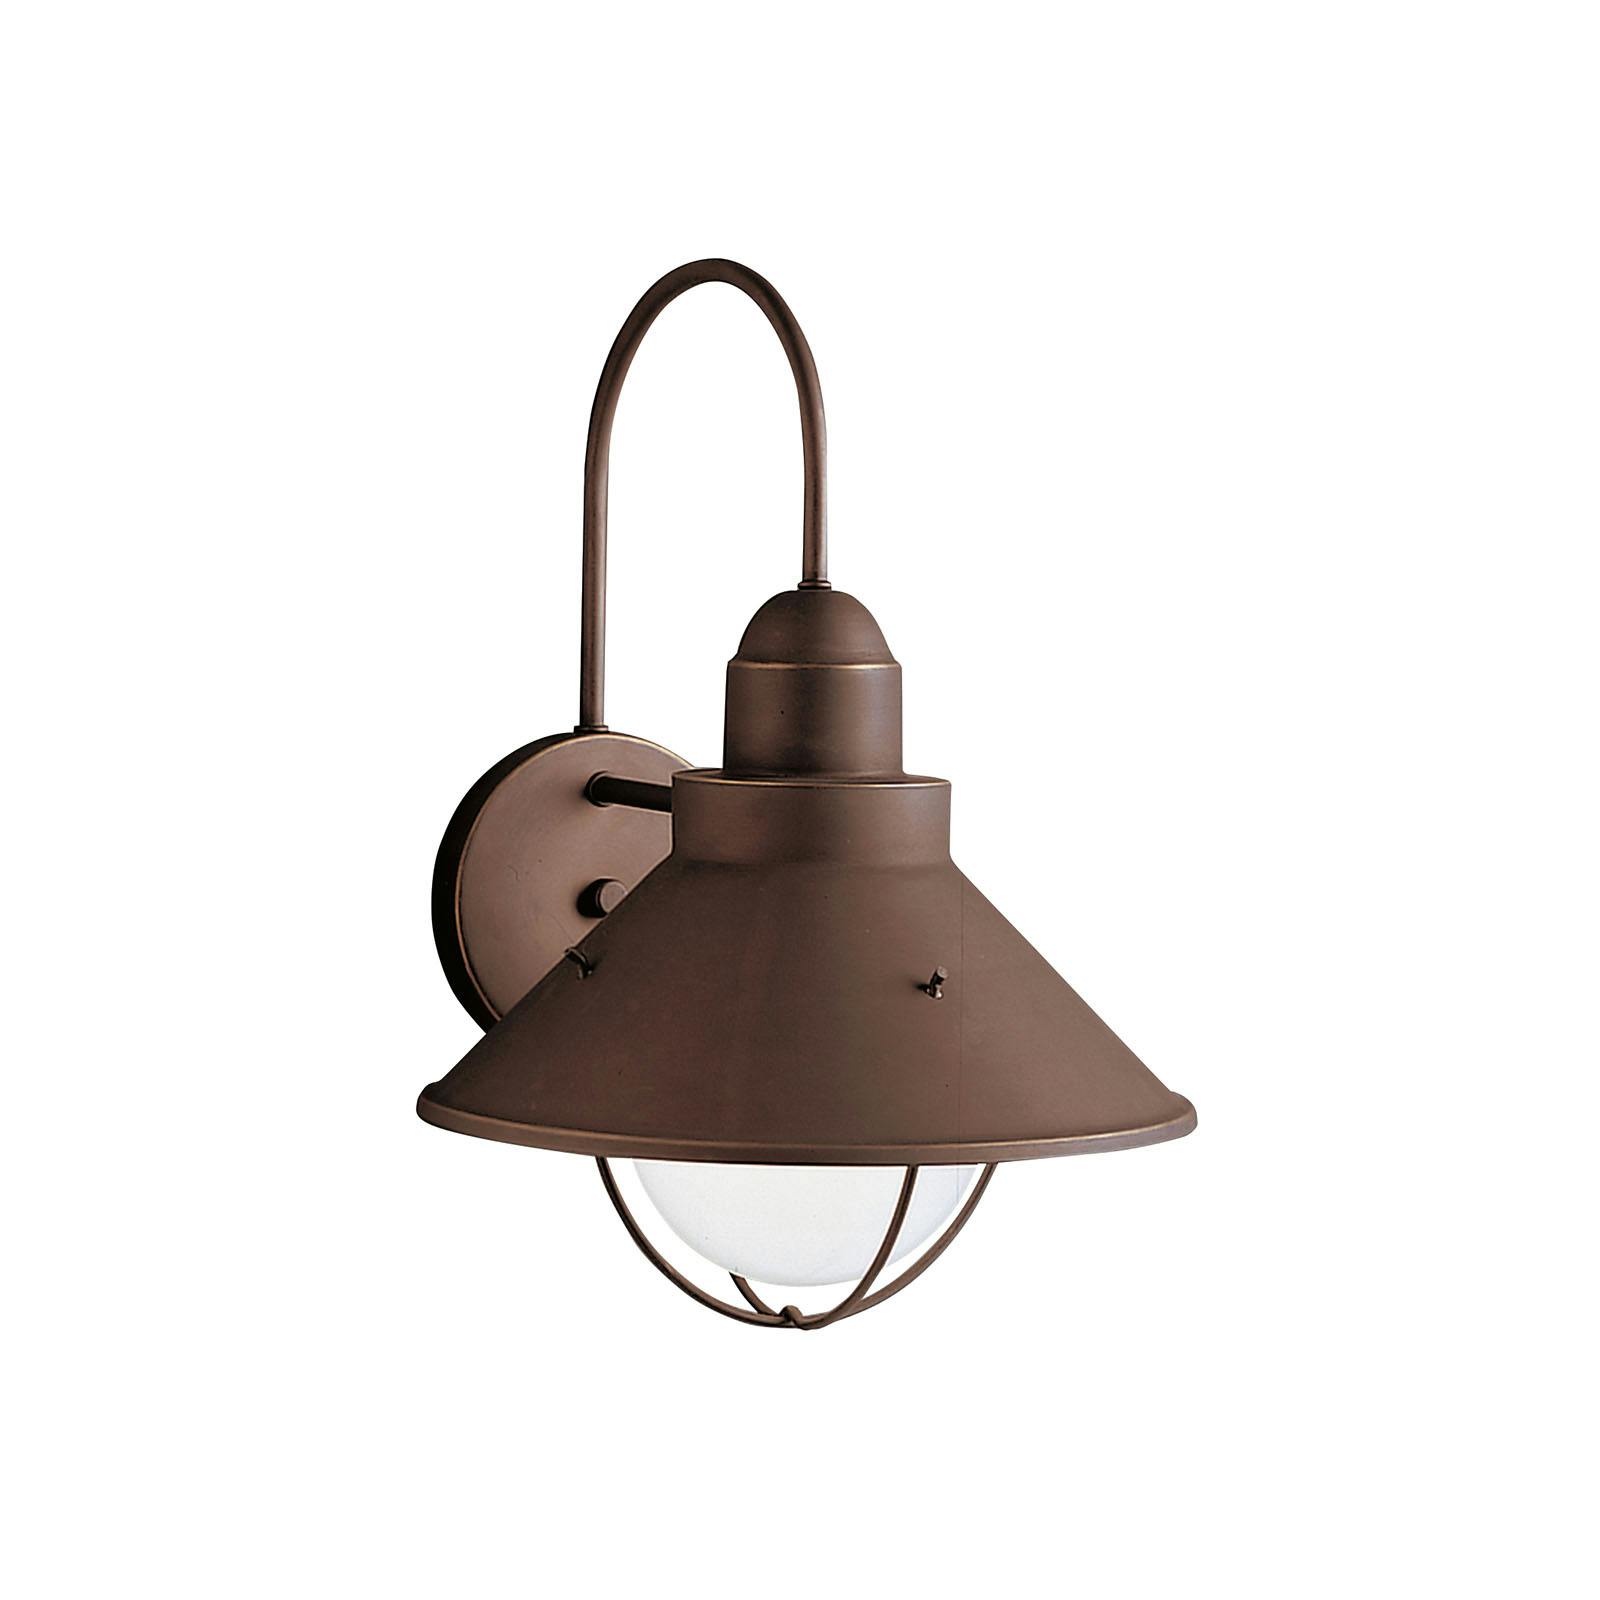 Seaside14.25" Wall Light Olde Bronze on a white background